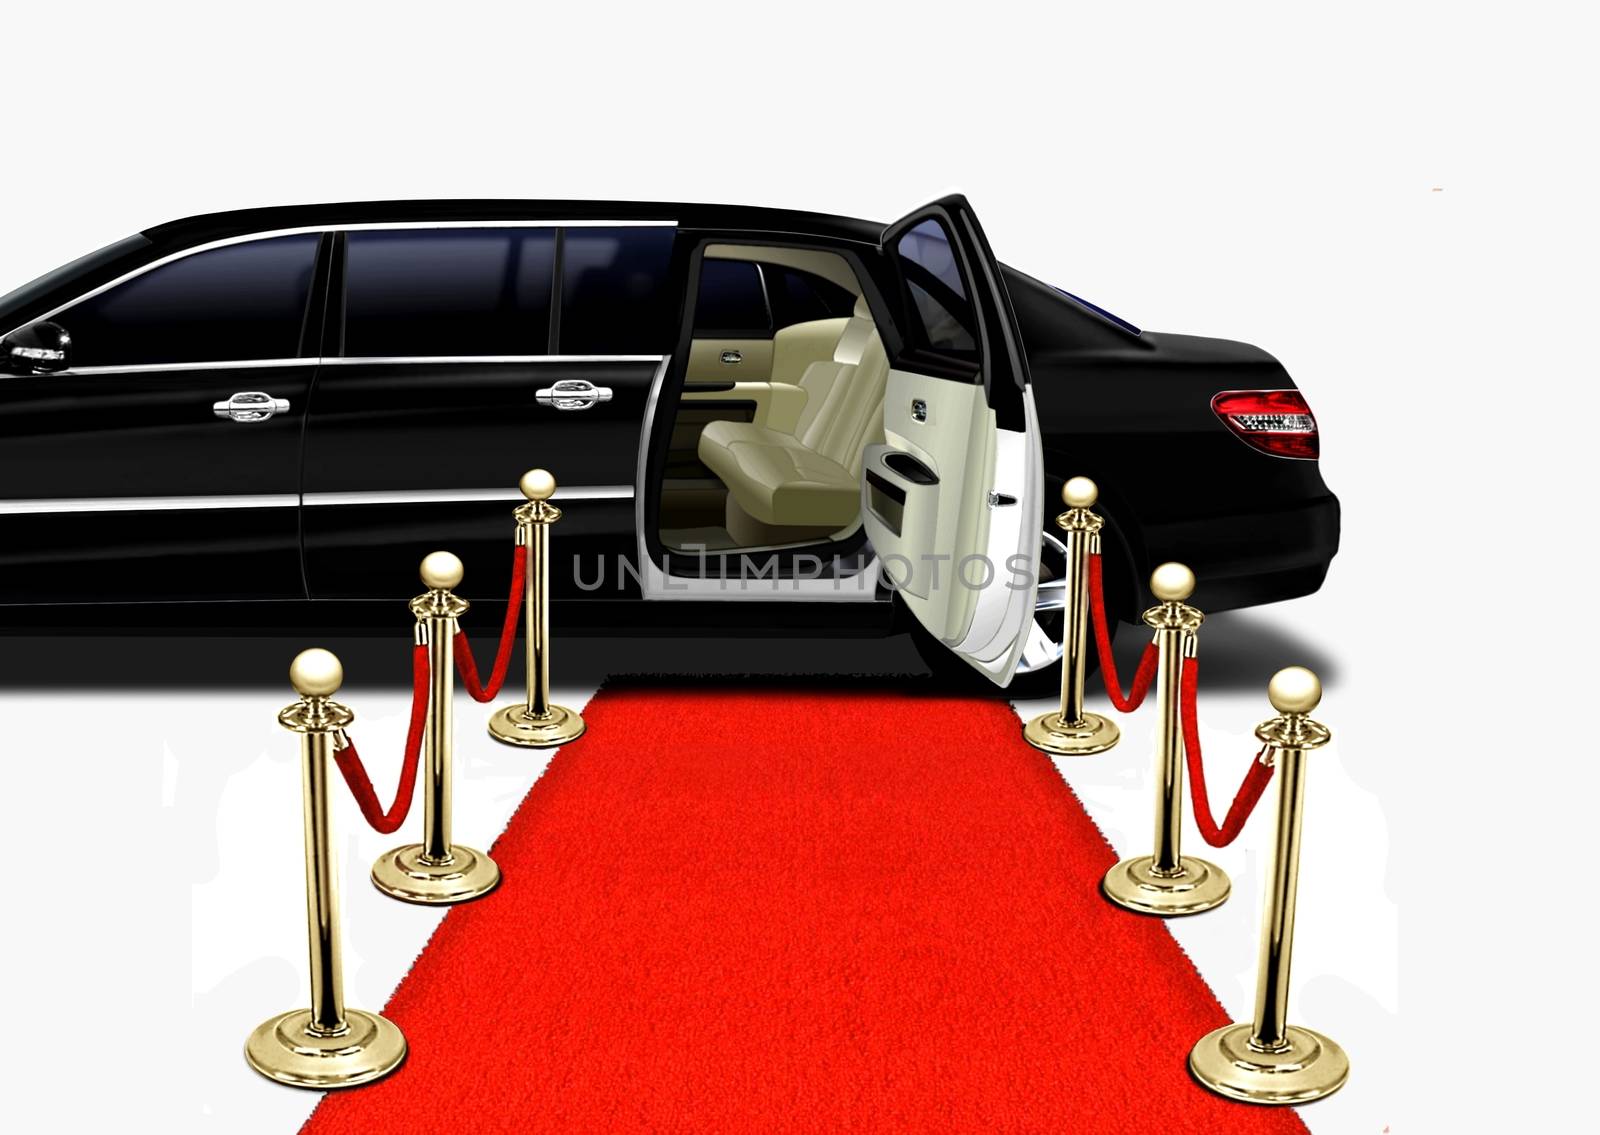 Black Limo on Red Carpet Arrival by razihusin